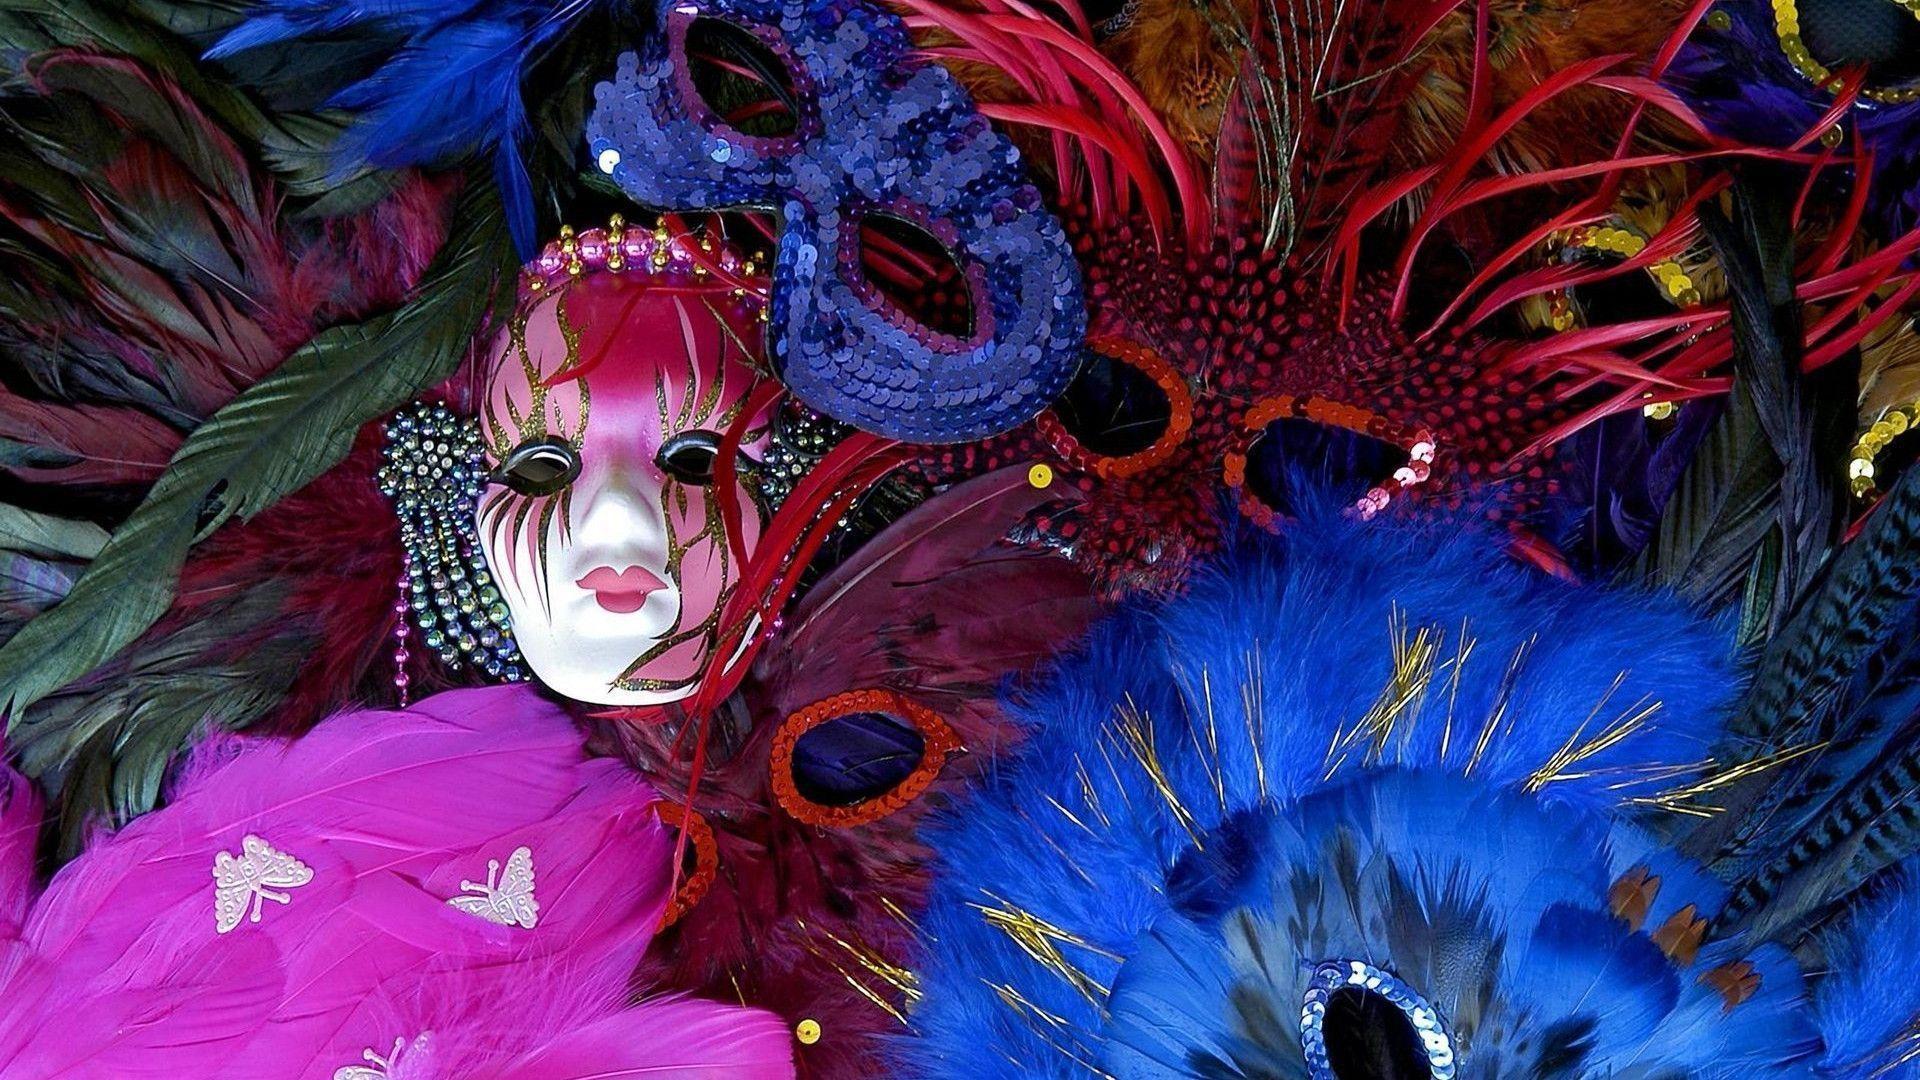 Enjoy our wallpaper of the month!!! Mardi Gras